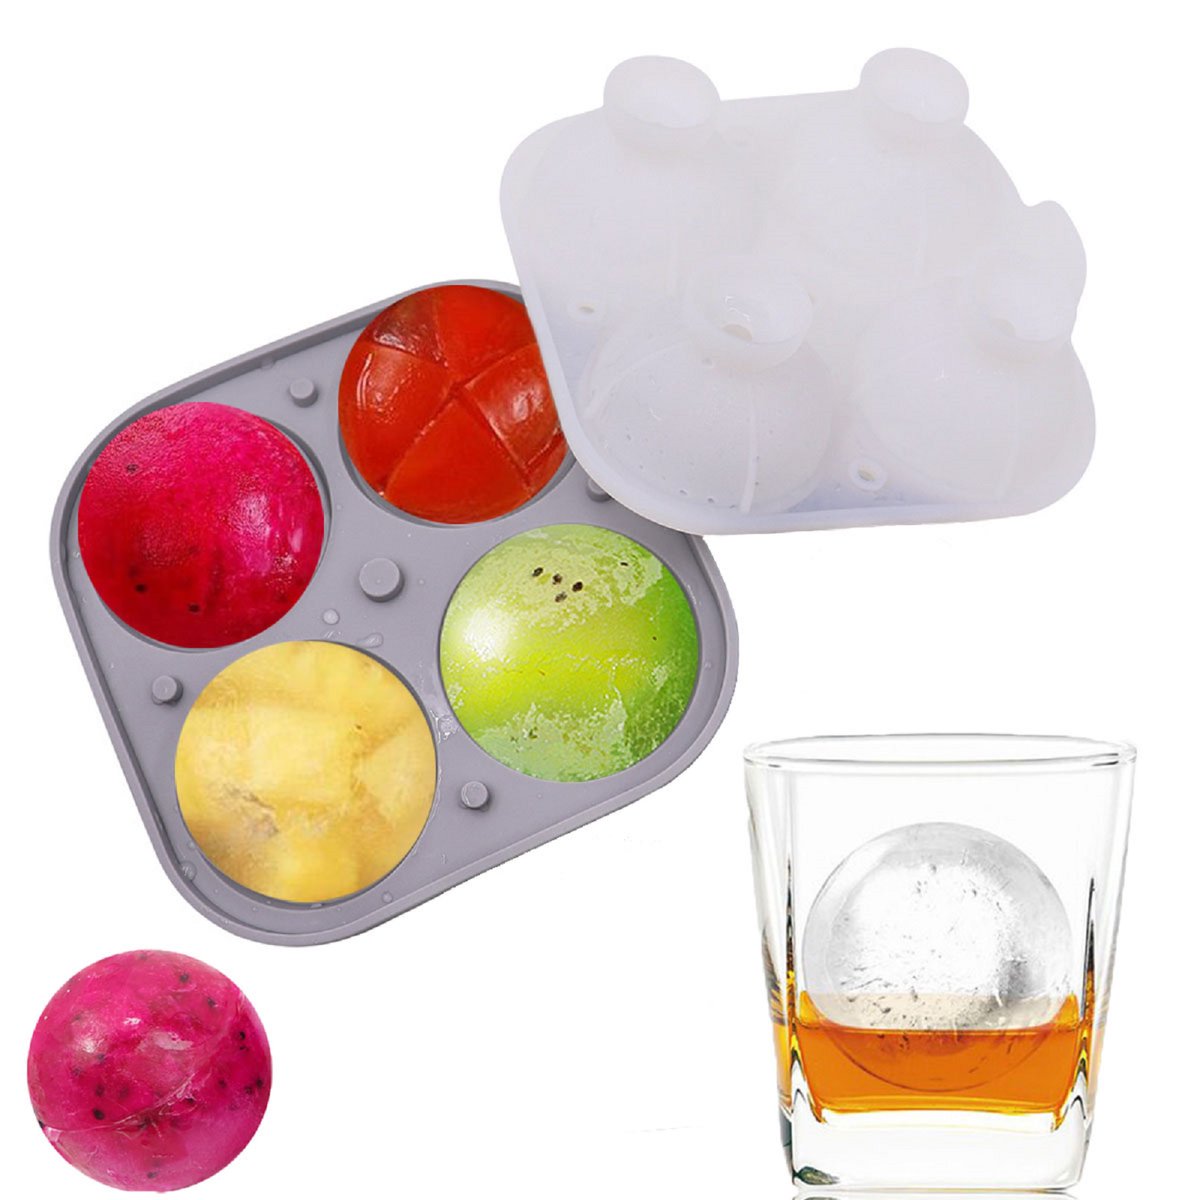 This summer,we have ice tray and ice drink,do you want spend your time with us?
#icetray #ice #icedrink #summer #coldfeetcrowder